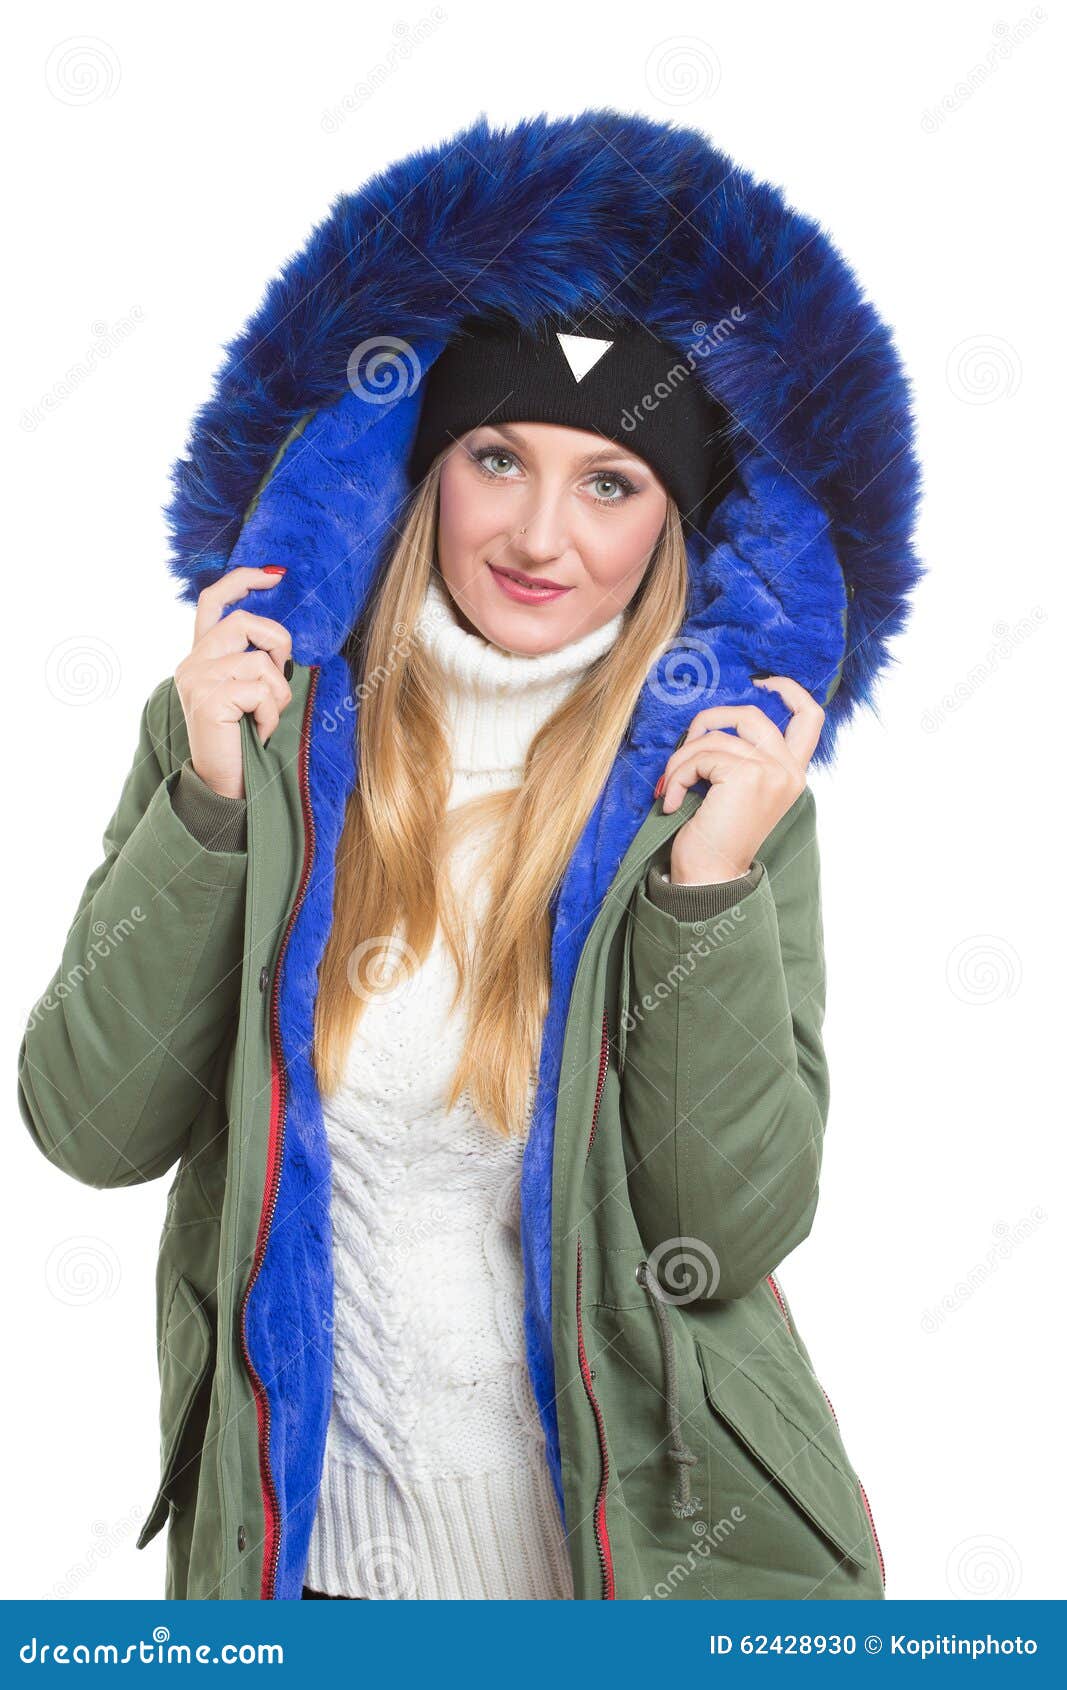 Woman Wearing Winter Jacket Scarf and Cap Stock Photo - Image of cute ...